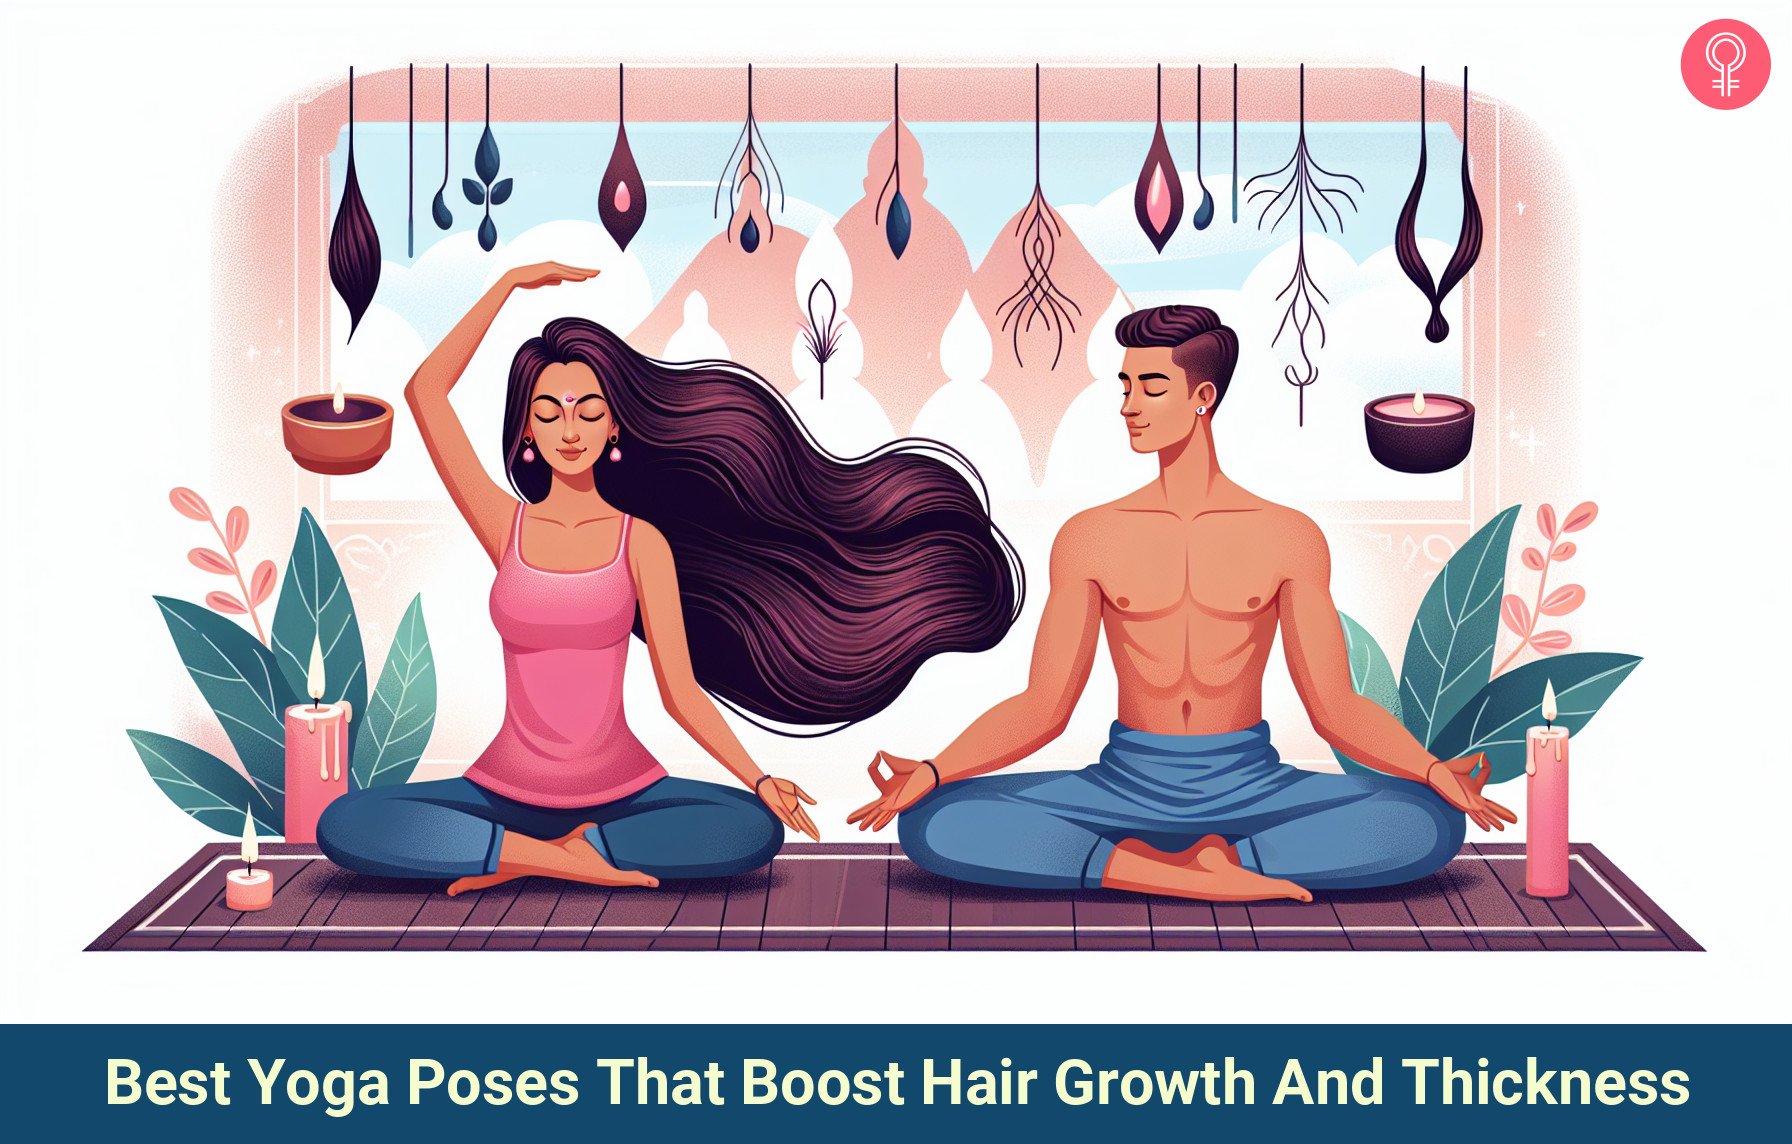 Hair care: Try these yoga asanas for healthy strands, improved texture,  reduced hair fall | Life-style News - The Indian Express